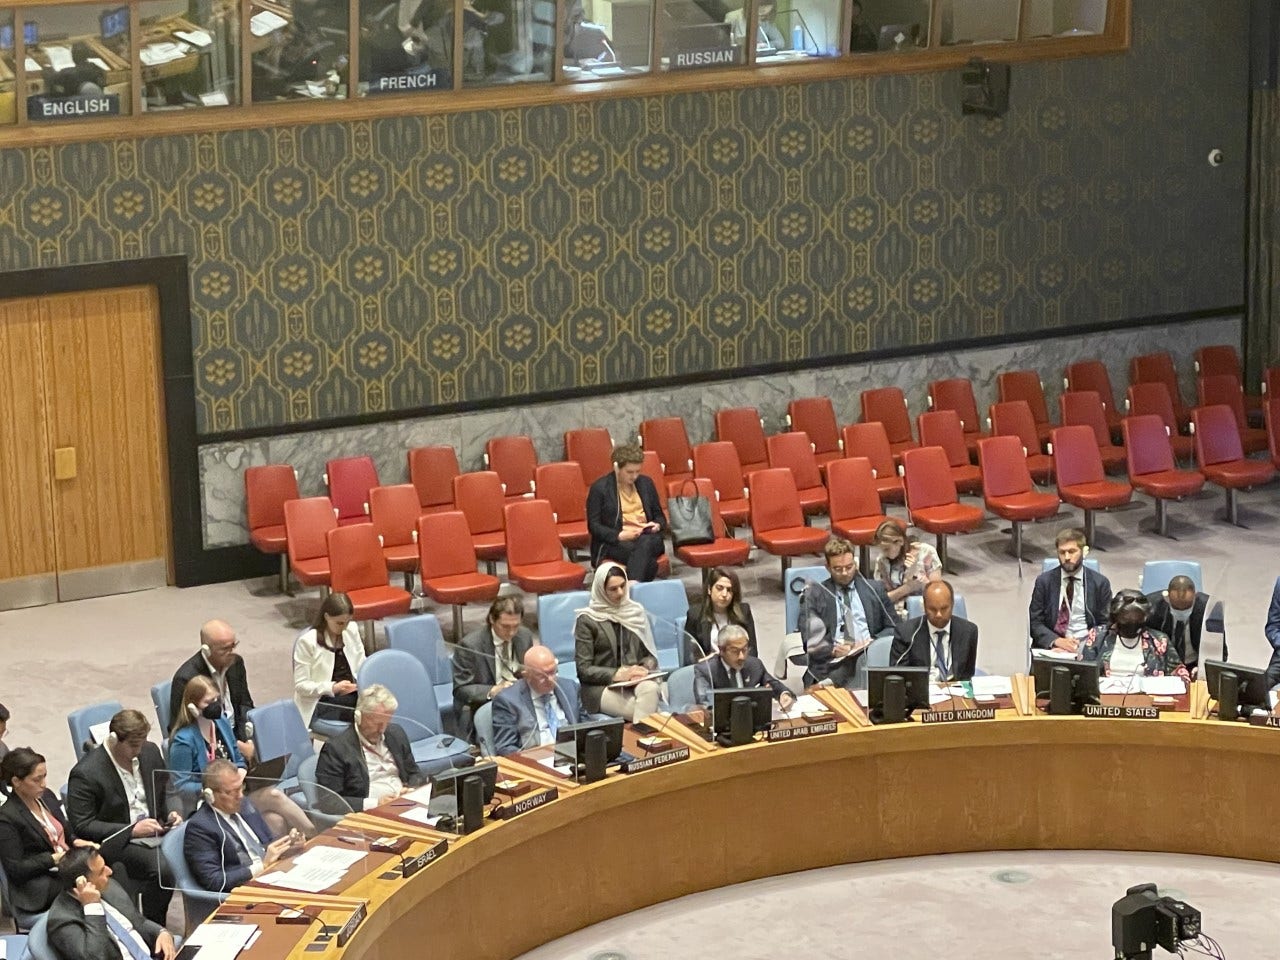 After Israel hits terror group, UN Security Council meets as some members rebuke the Jewish state